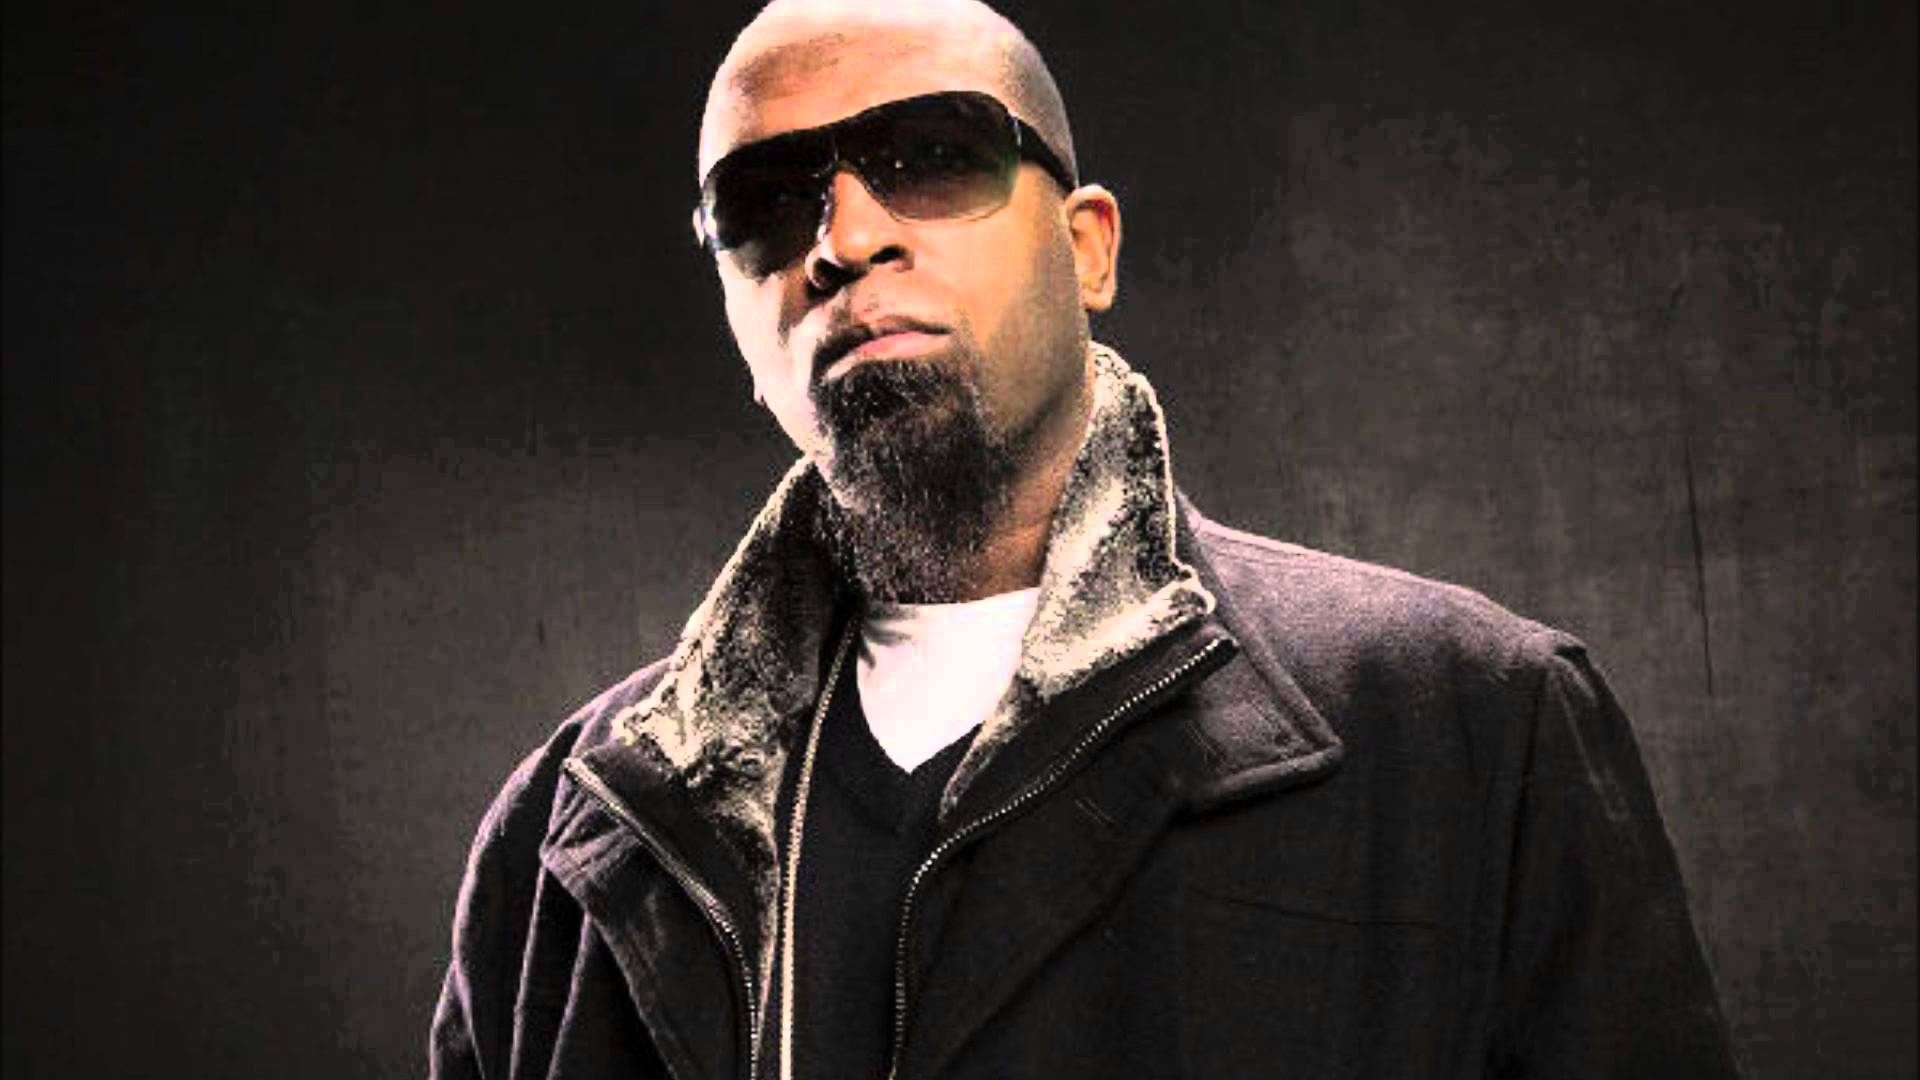 Tech N9ne Donates Bras Collected On Tour To Domestic Violence